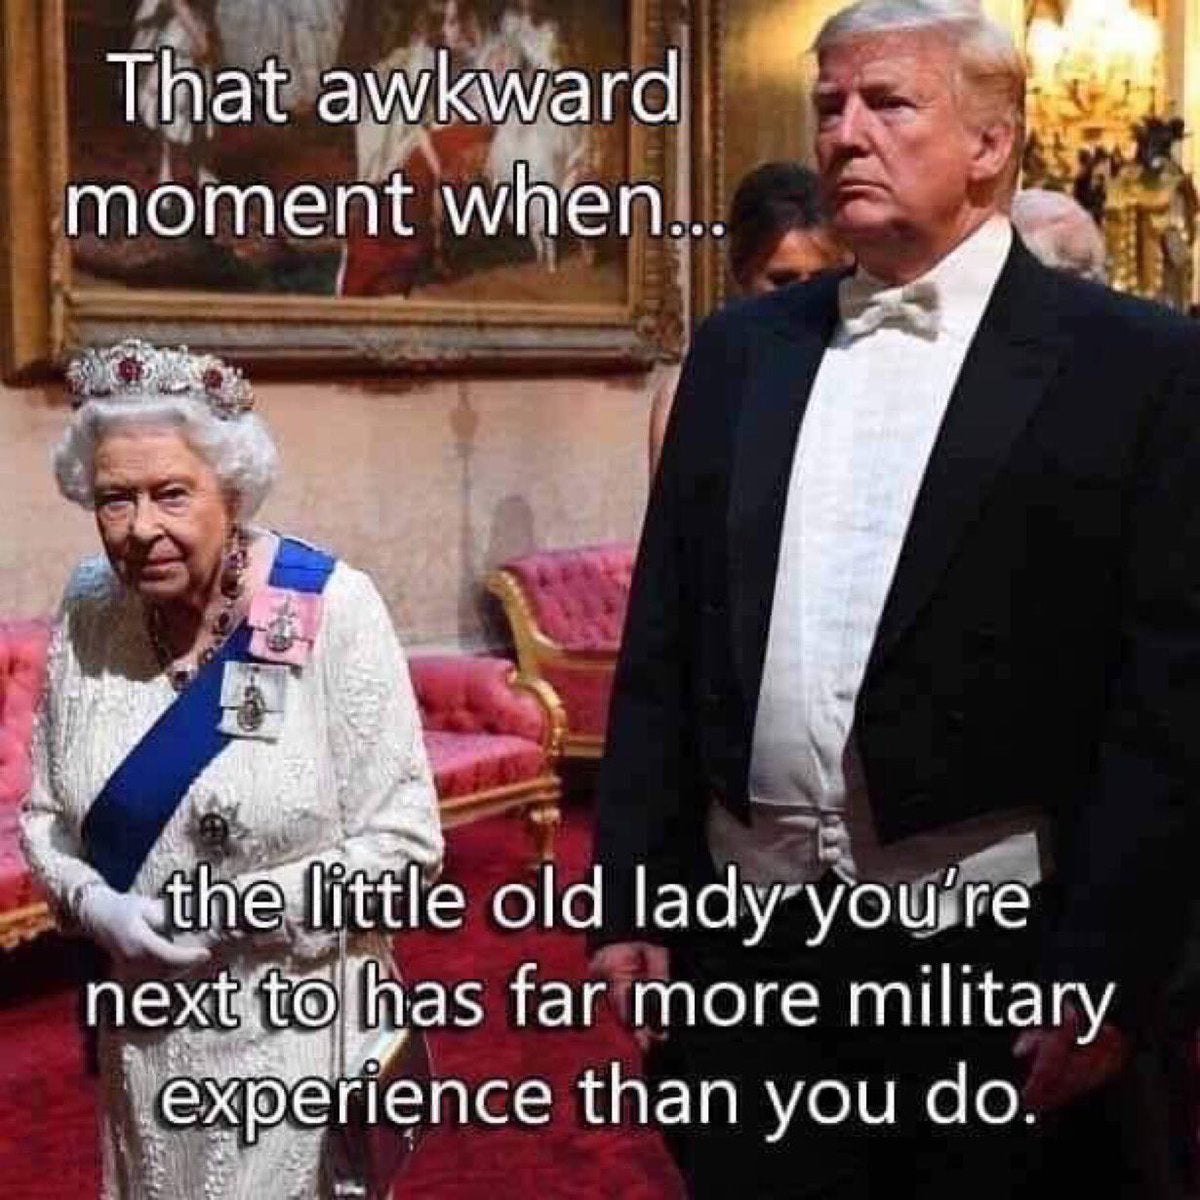 donald trump with the queen - That awkward moment when... the little old lady you're next to has far more military experience than you do.